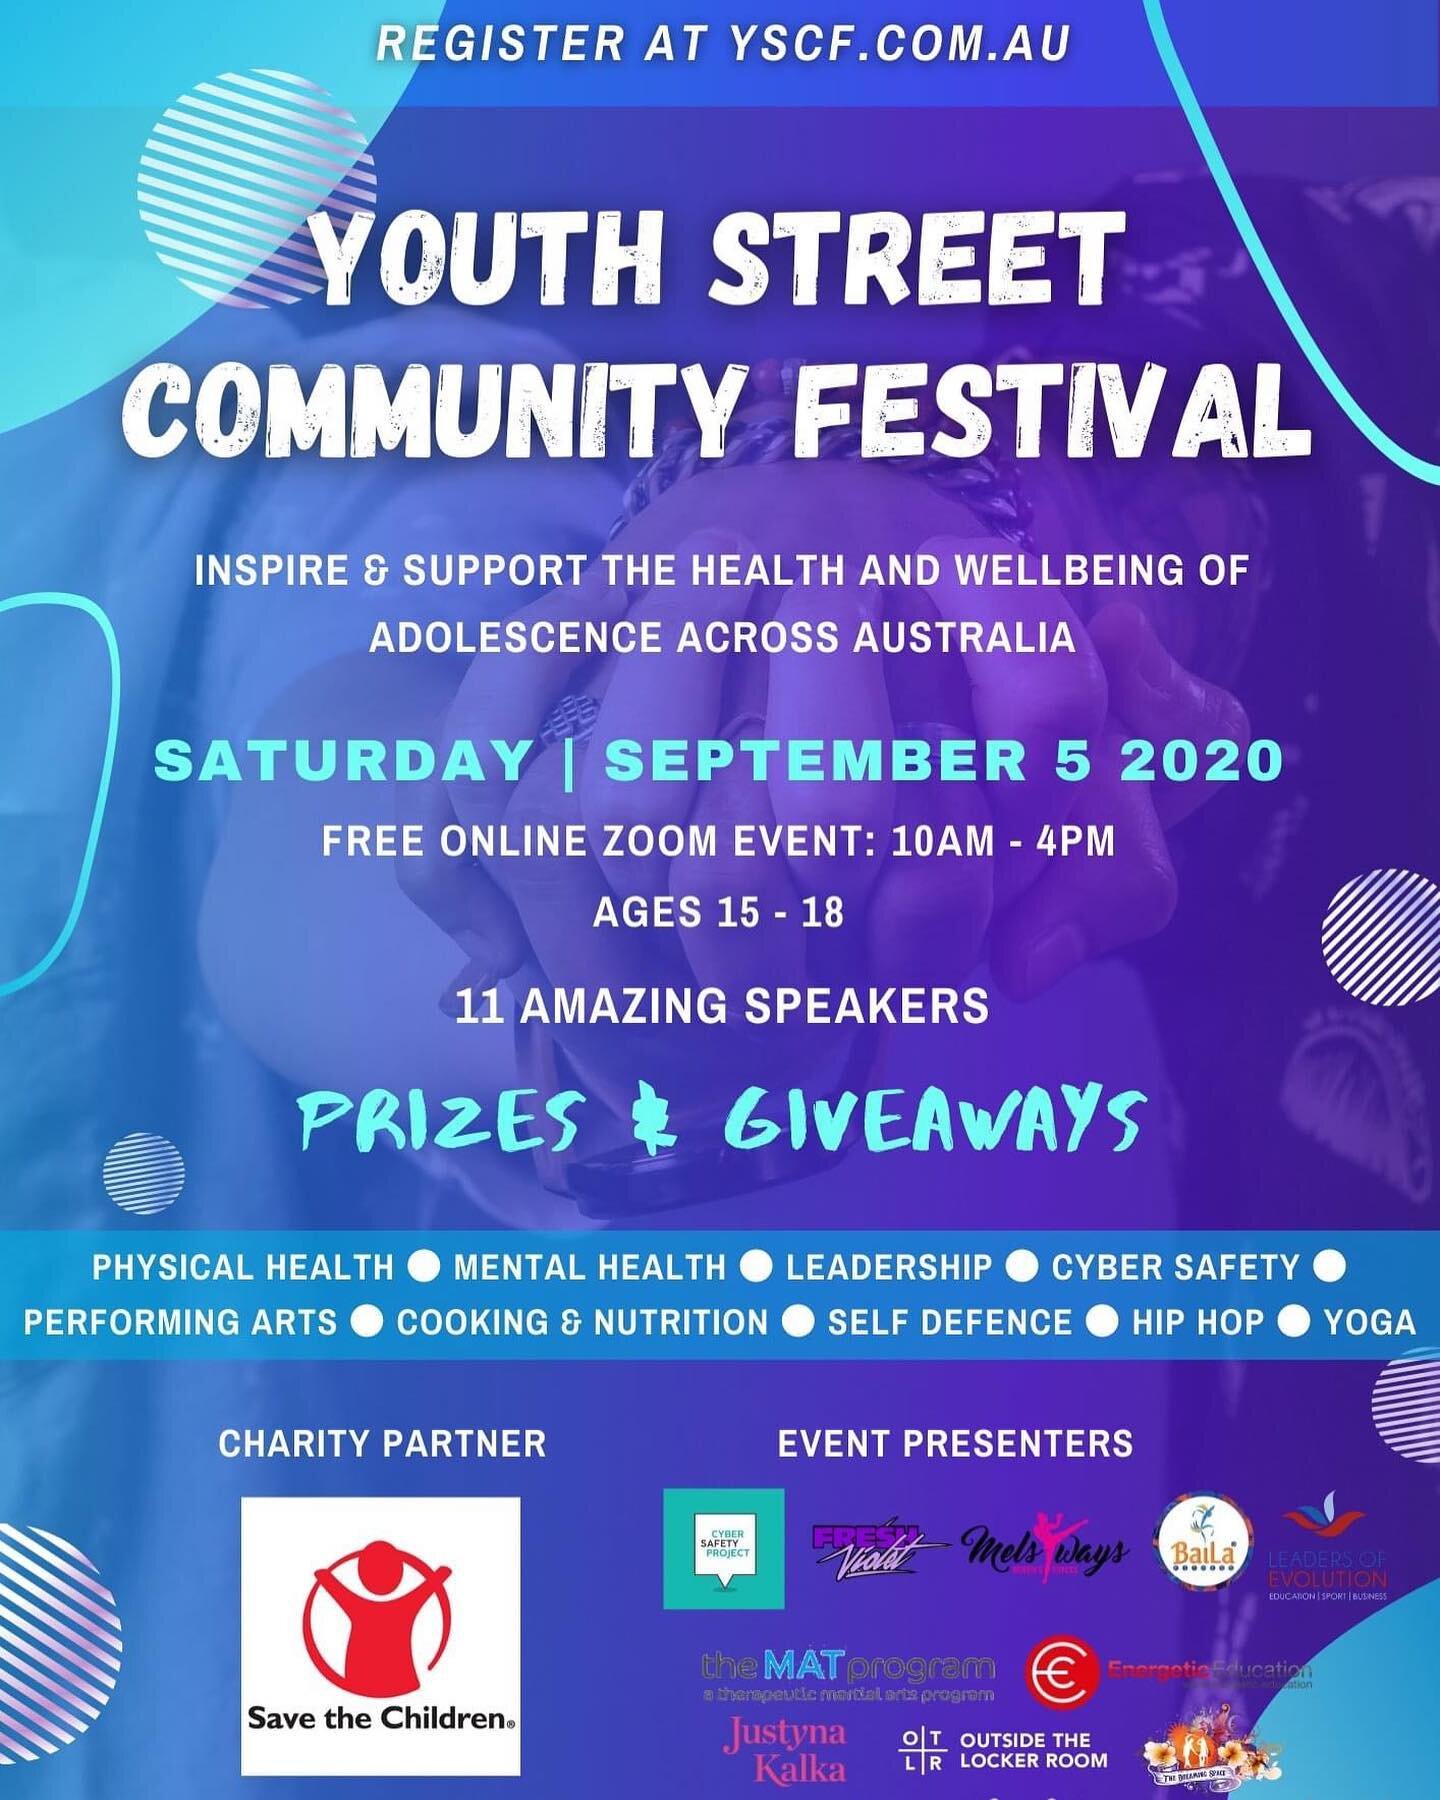 We will be running a session at this event this coming Saturday 5 of September.  See you then and thank you to @yscf.com.au for the invitation! 👊🏼

#empoweringeverychild #mentalhealth #mentalhealthmatters